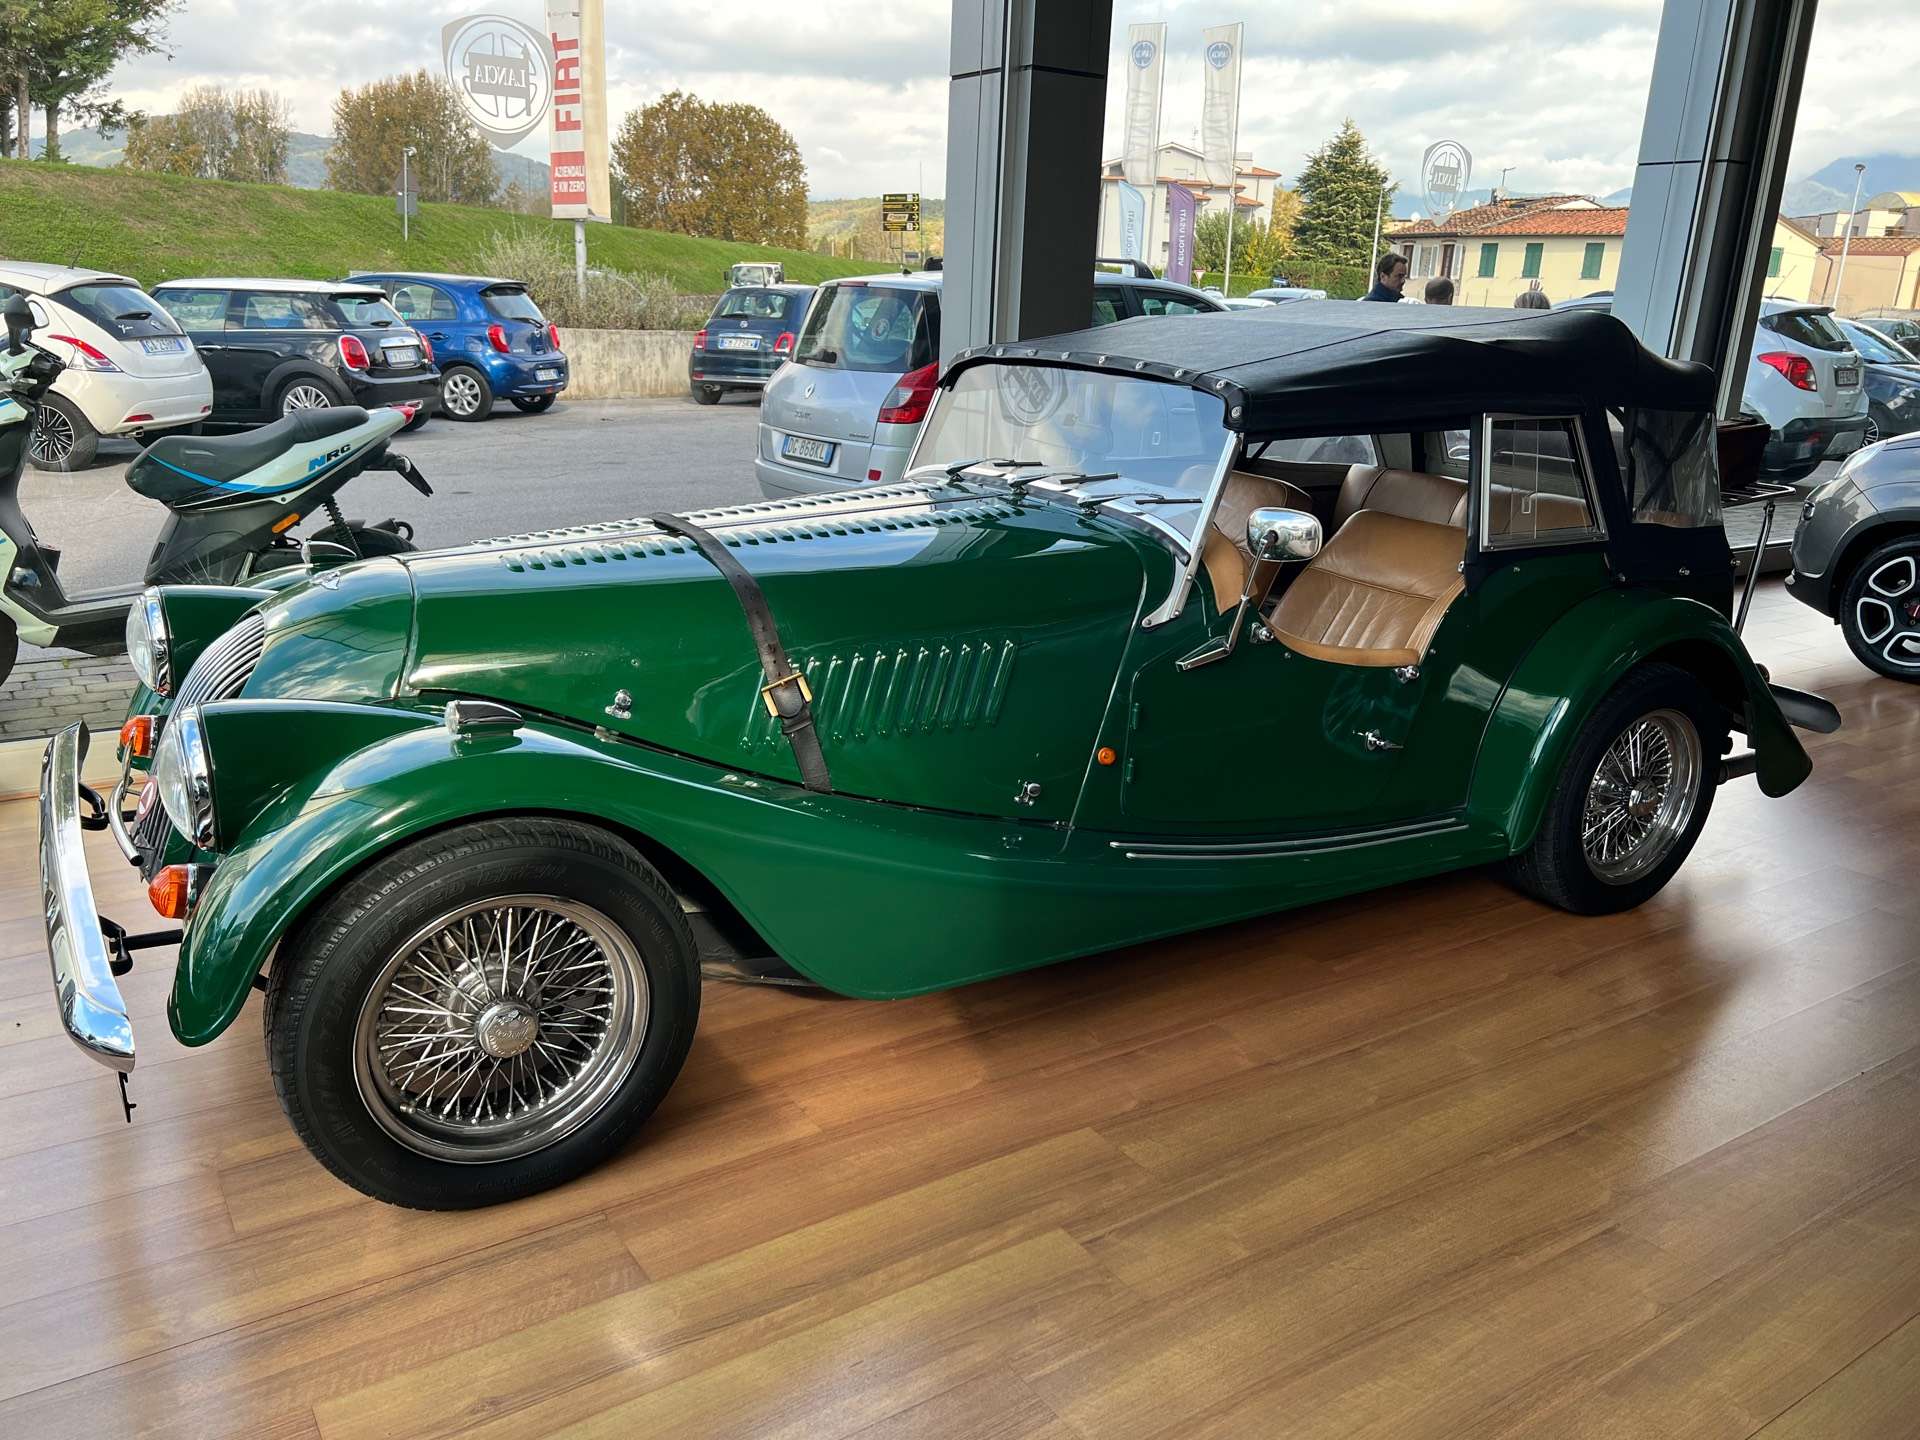 Morgan Plus 4 Convertible in Green used in Lucca - Lu for € 44,000.-